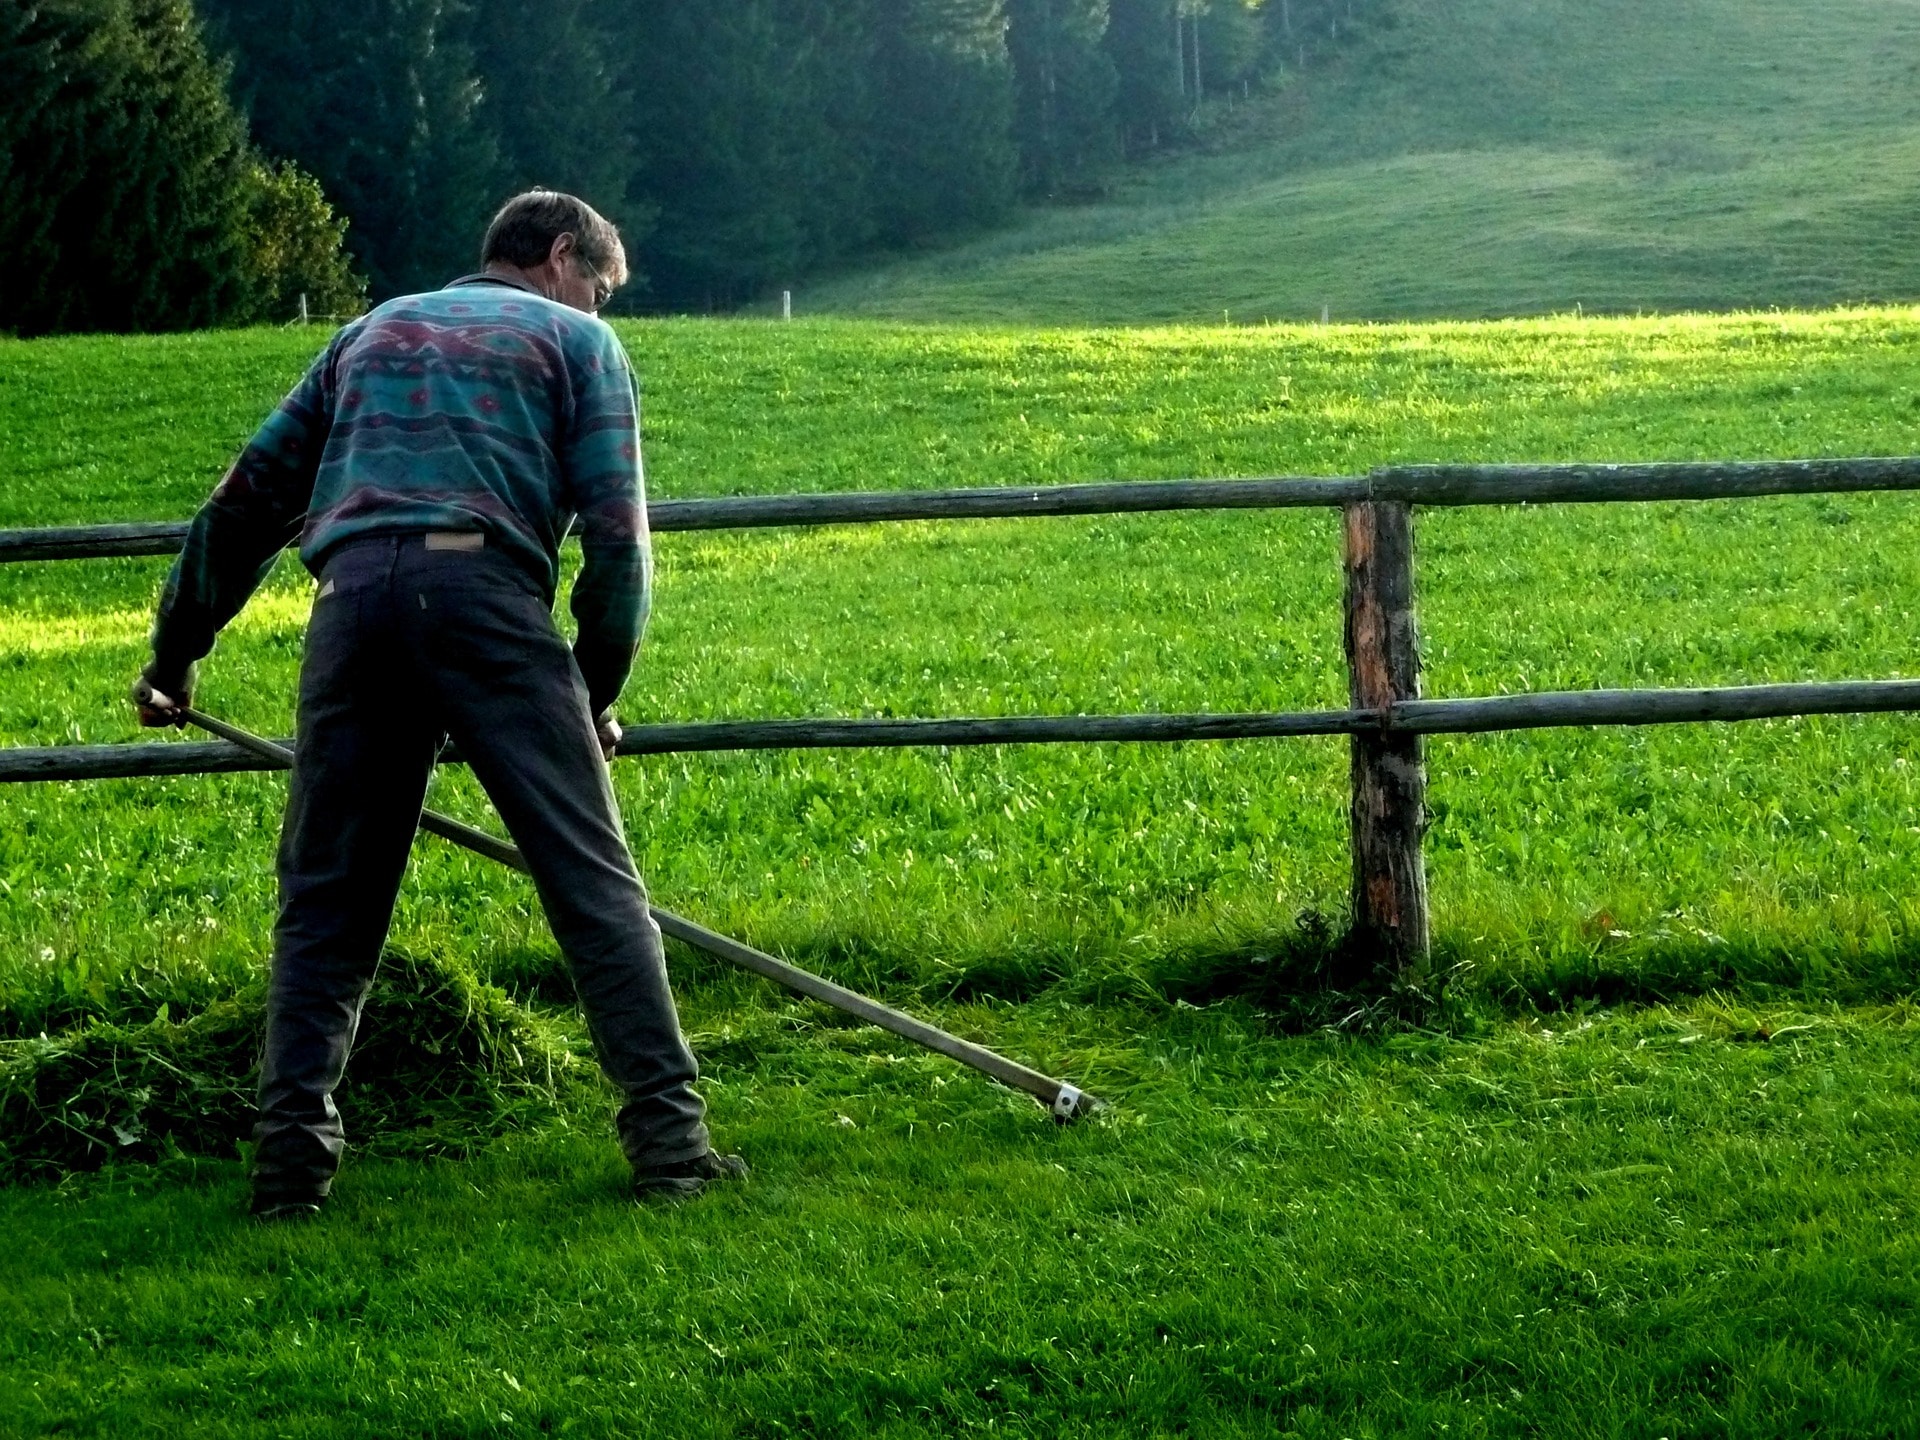 how to cut grass without a weed eater